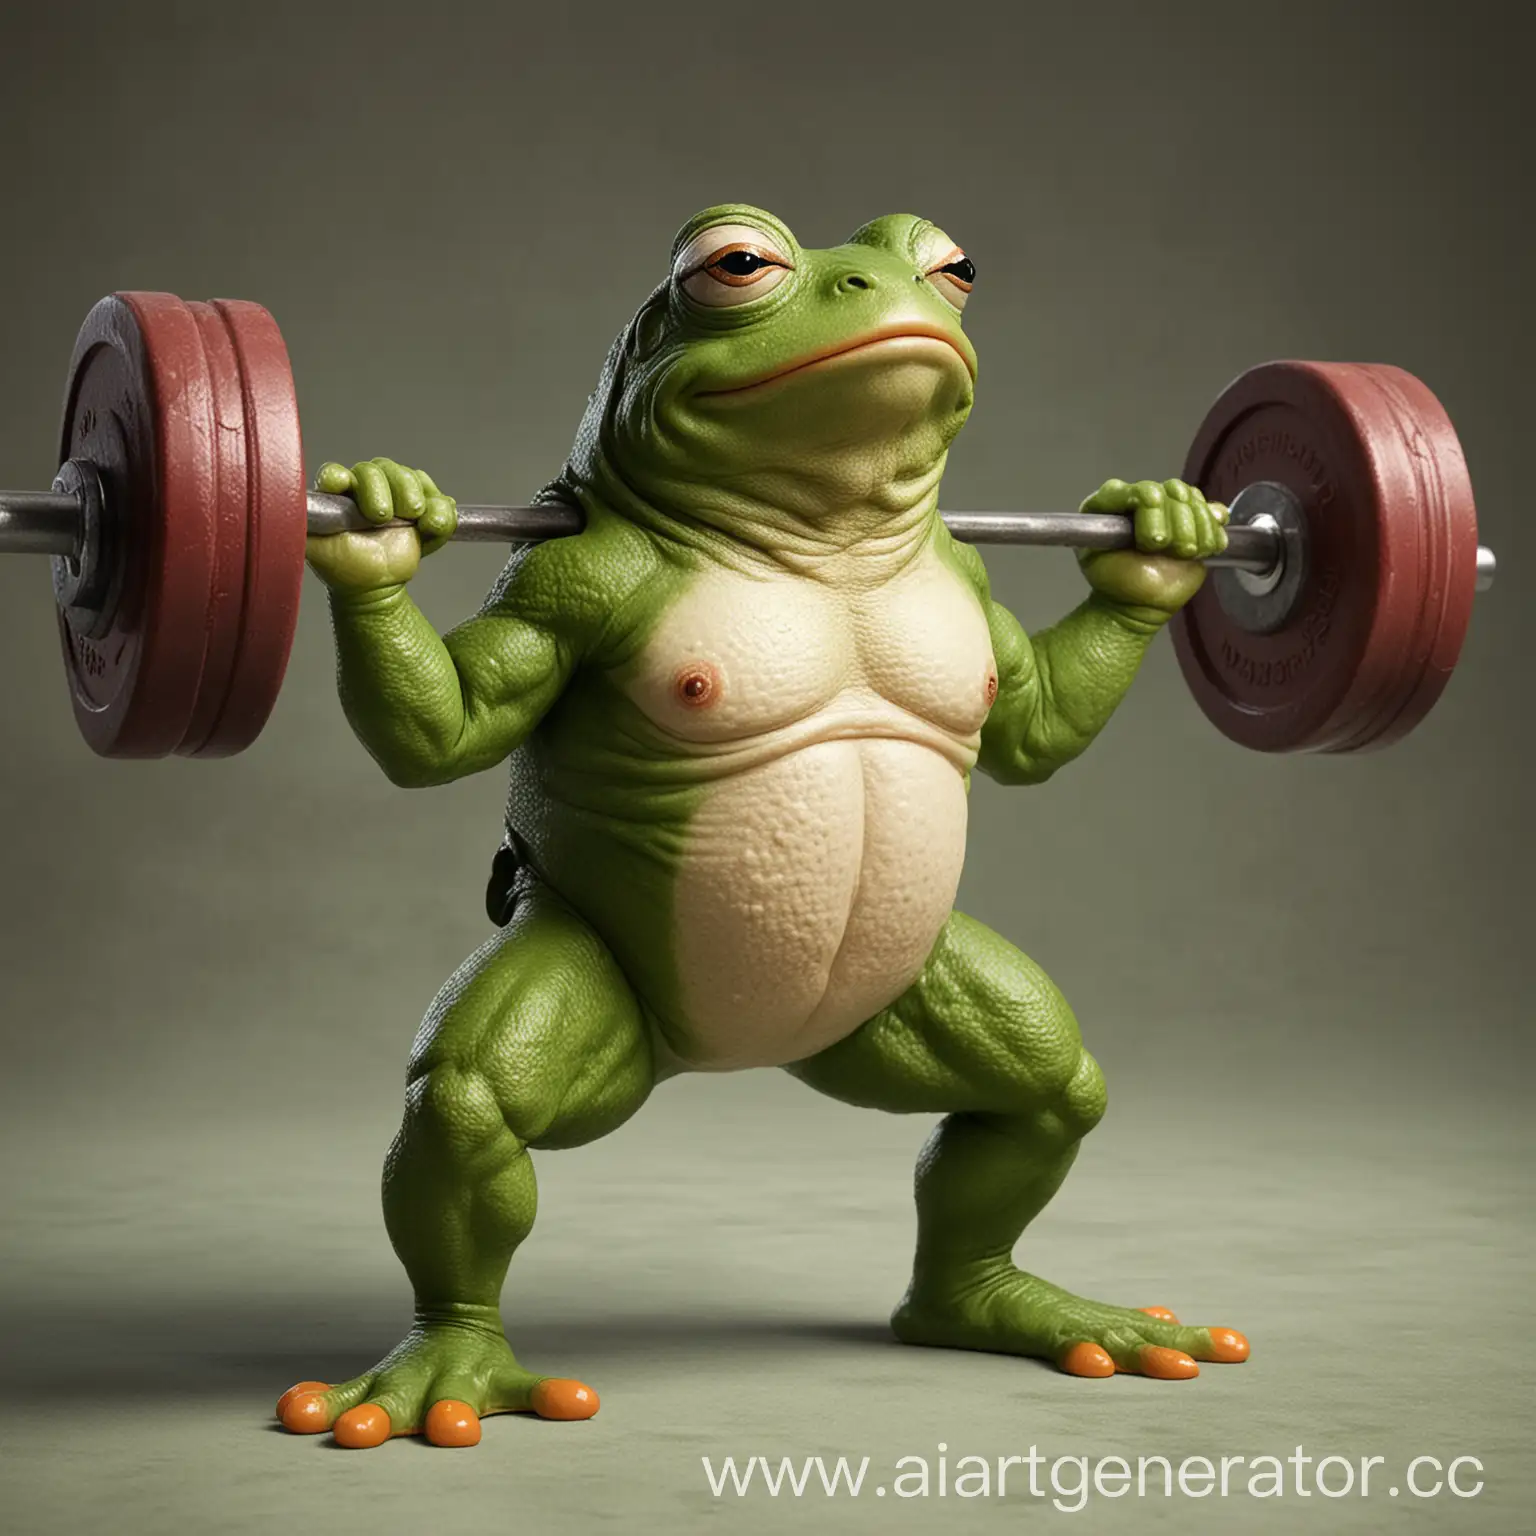 Muscular-Frog-Pepe-Weightlifter-Pumping-Iron-in-Gym